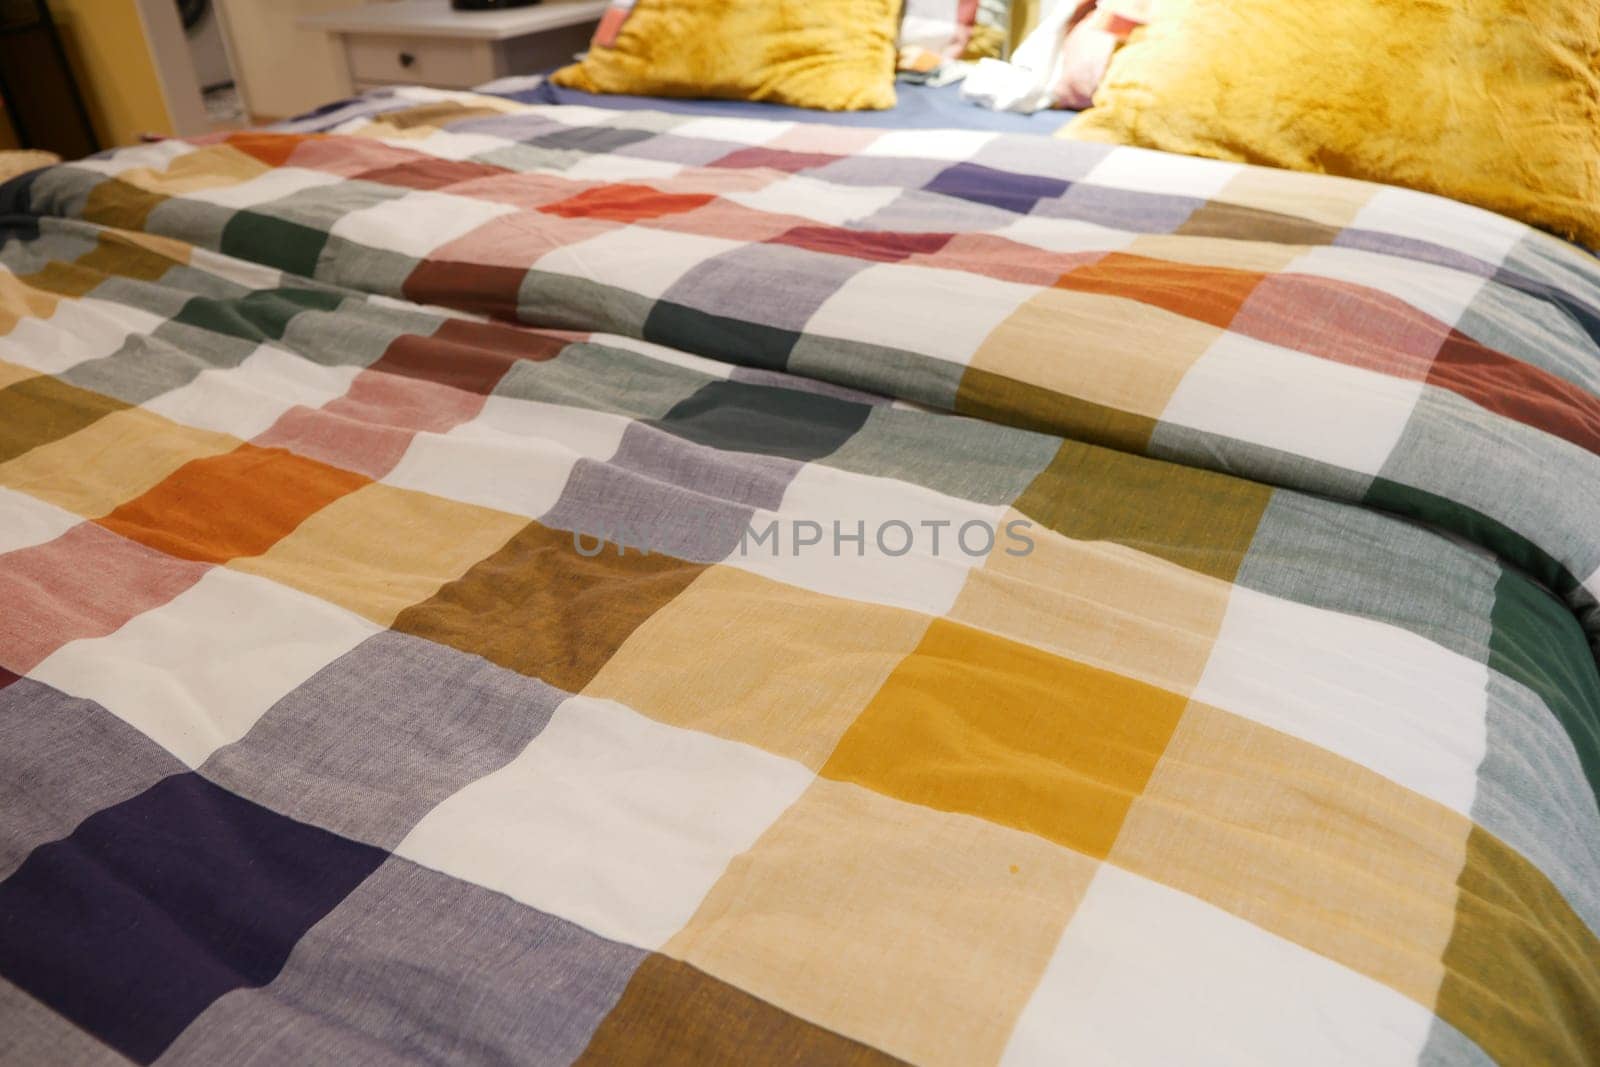 a bed with a colorful plaid comforter and pillows in shades of Purple, Orange, and Yellow